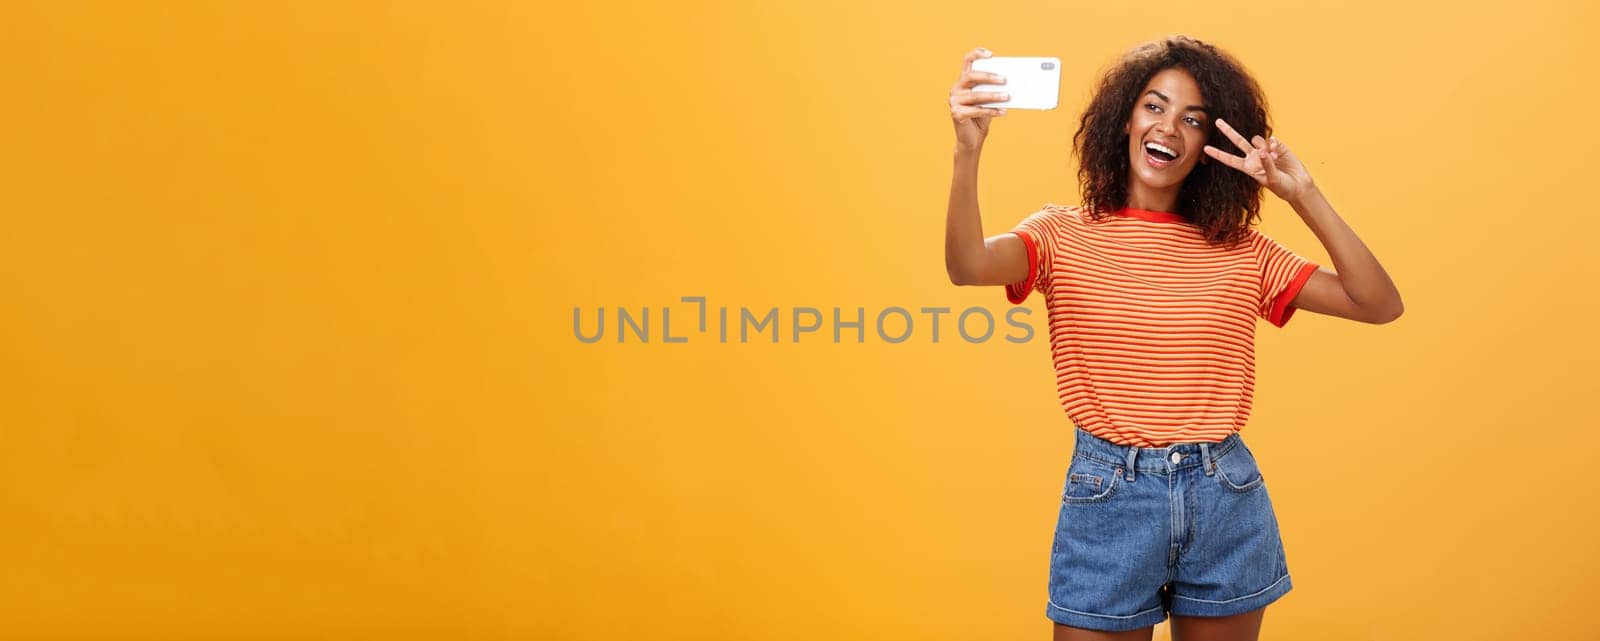 Girl making video vlog with brand new smartphone posting in internet trying become famous standing over orange background posing for selfie gazing at gadget screen showing peace or victory gesture. Copy space